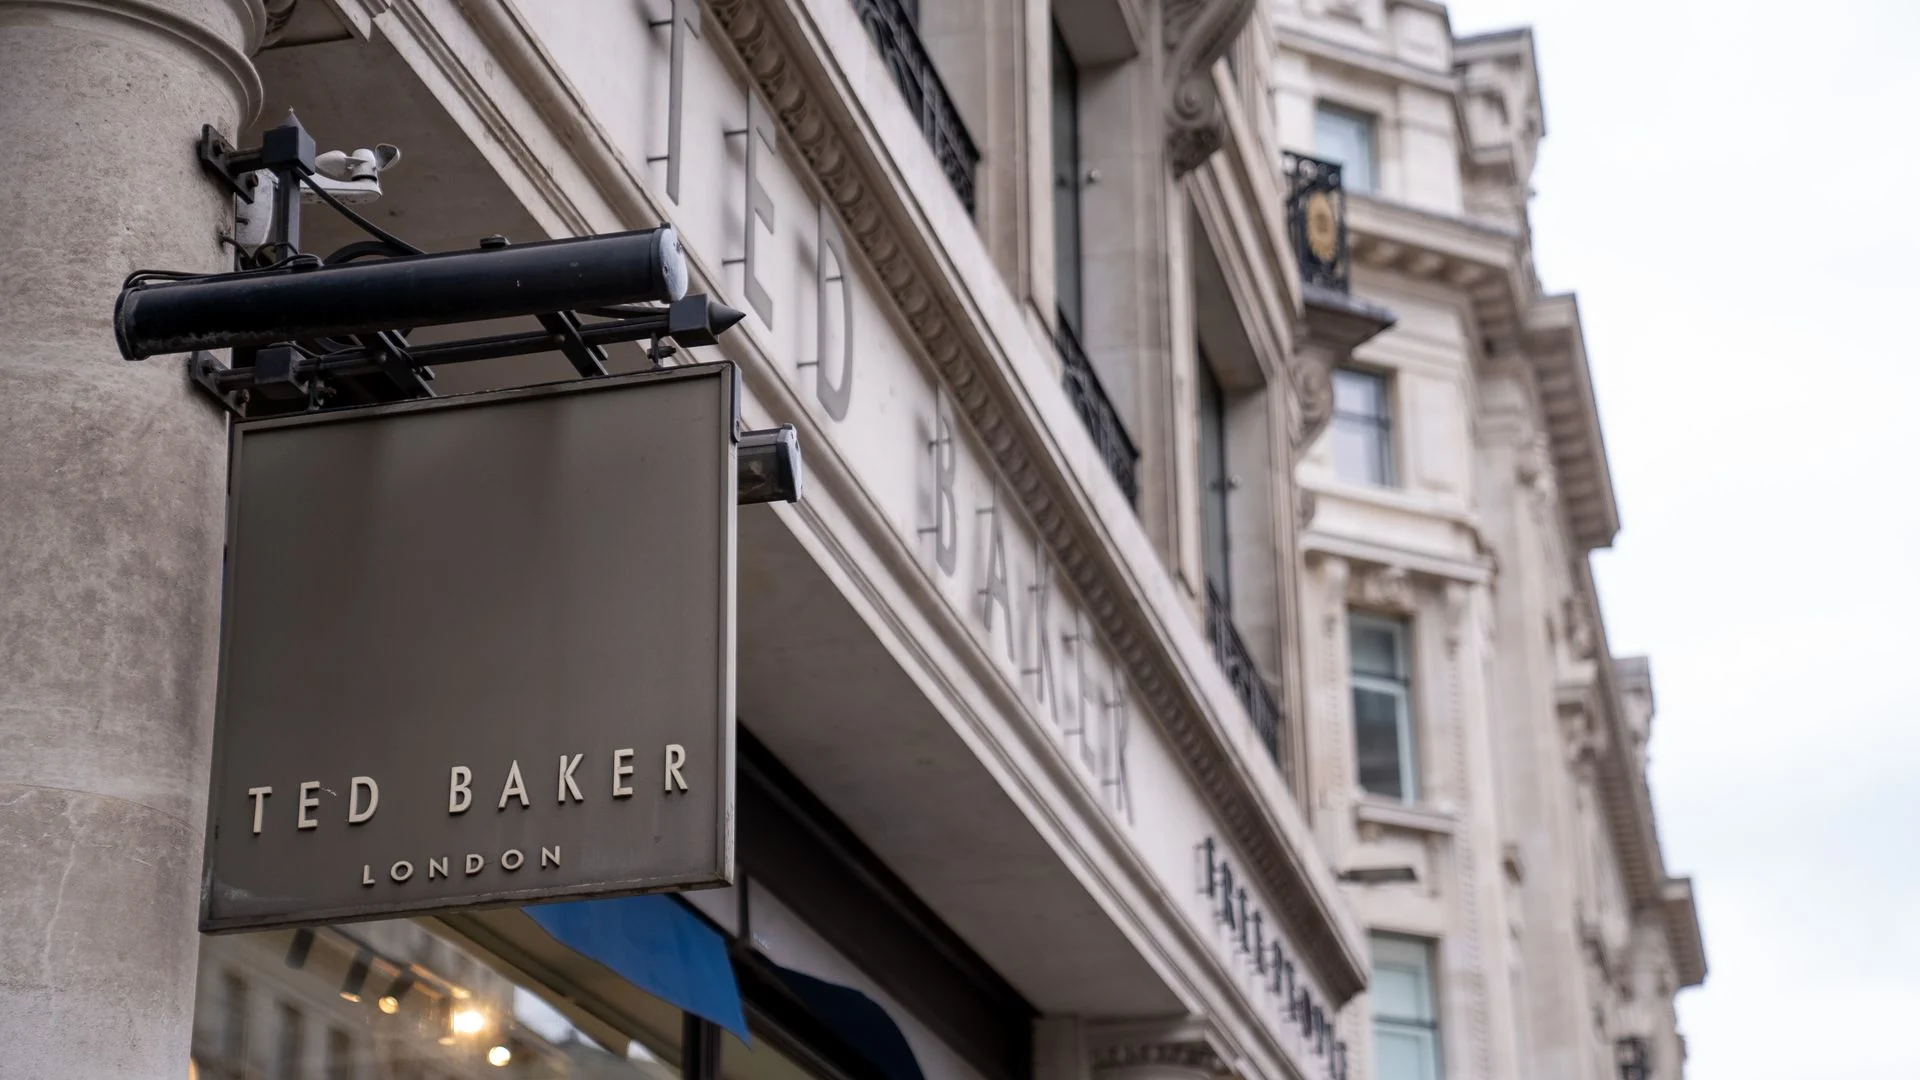 Why Are Ted Baker and Other Major Retailers Shutting Stores Across North America?